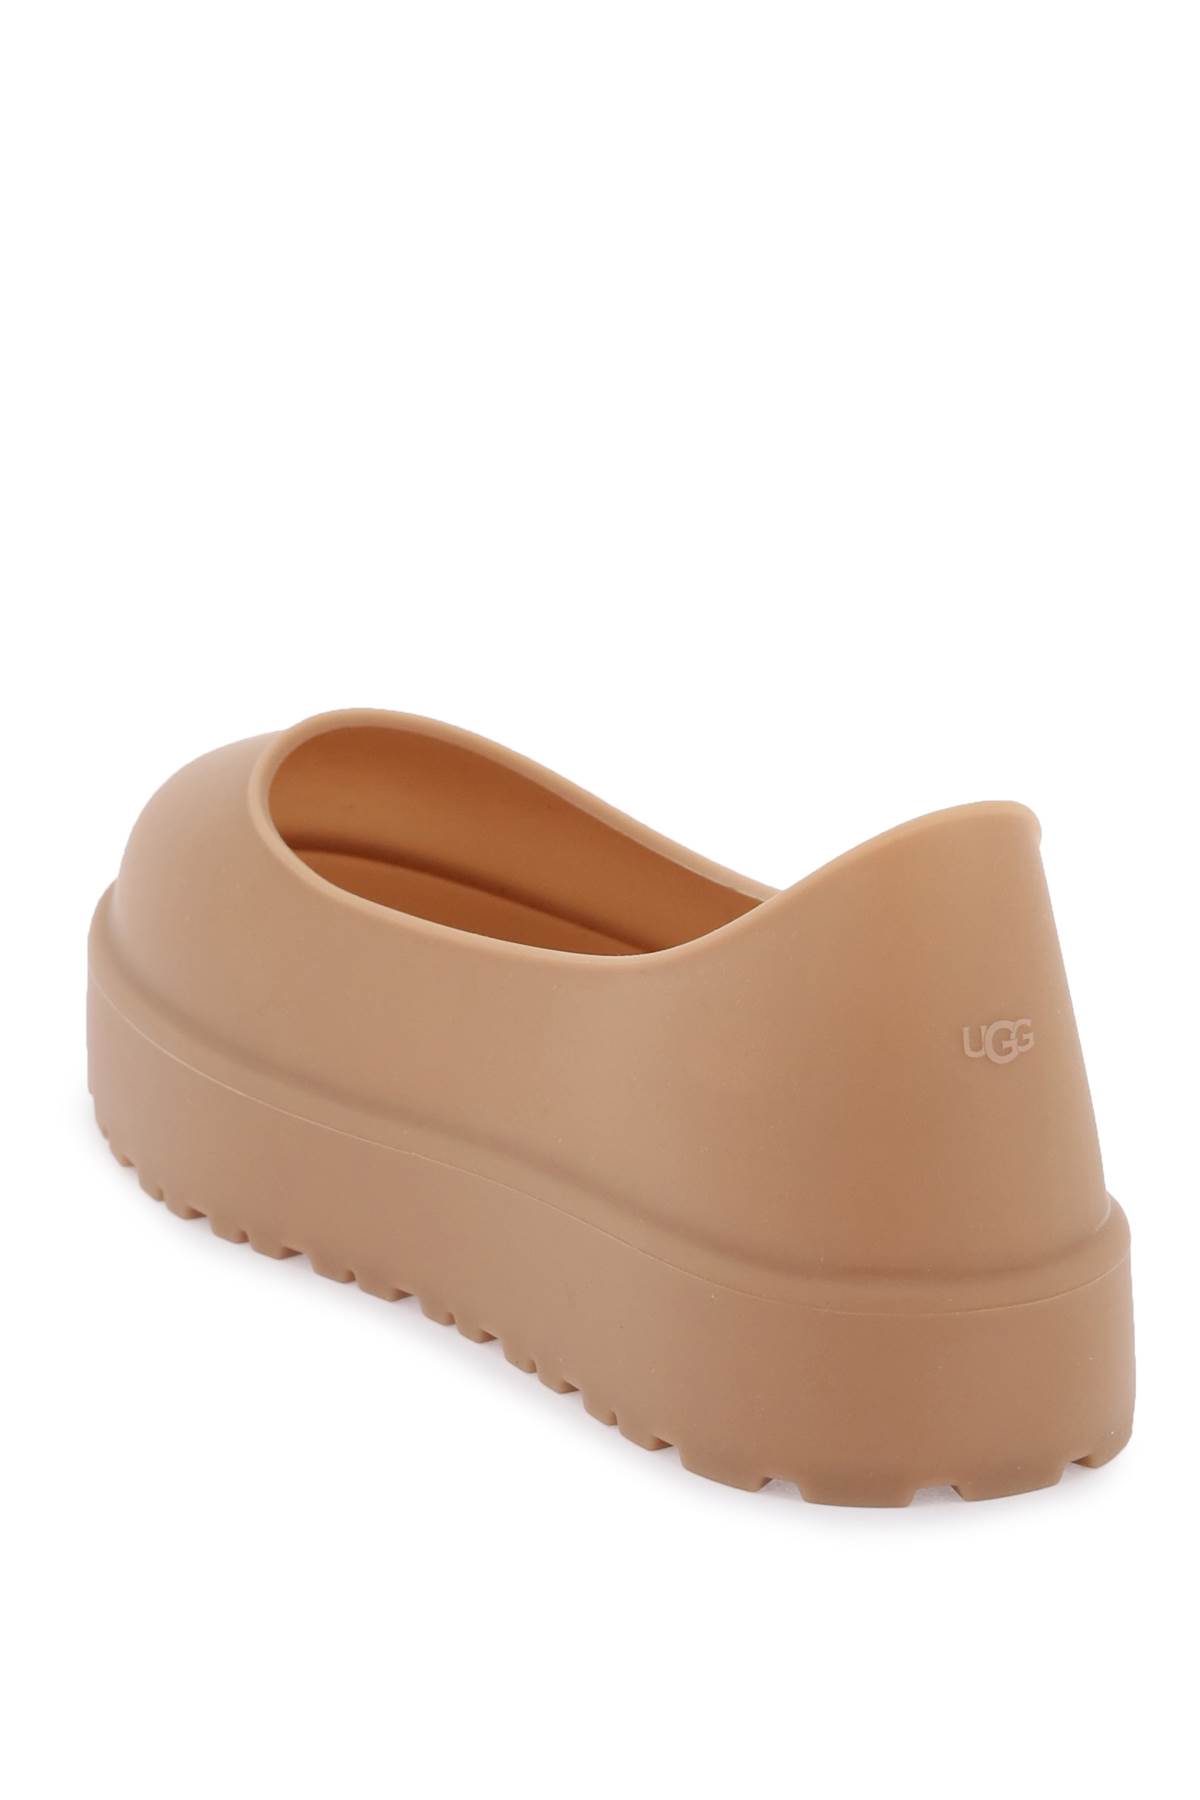 Shop Ugg Guard Shoe Protection In Beige